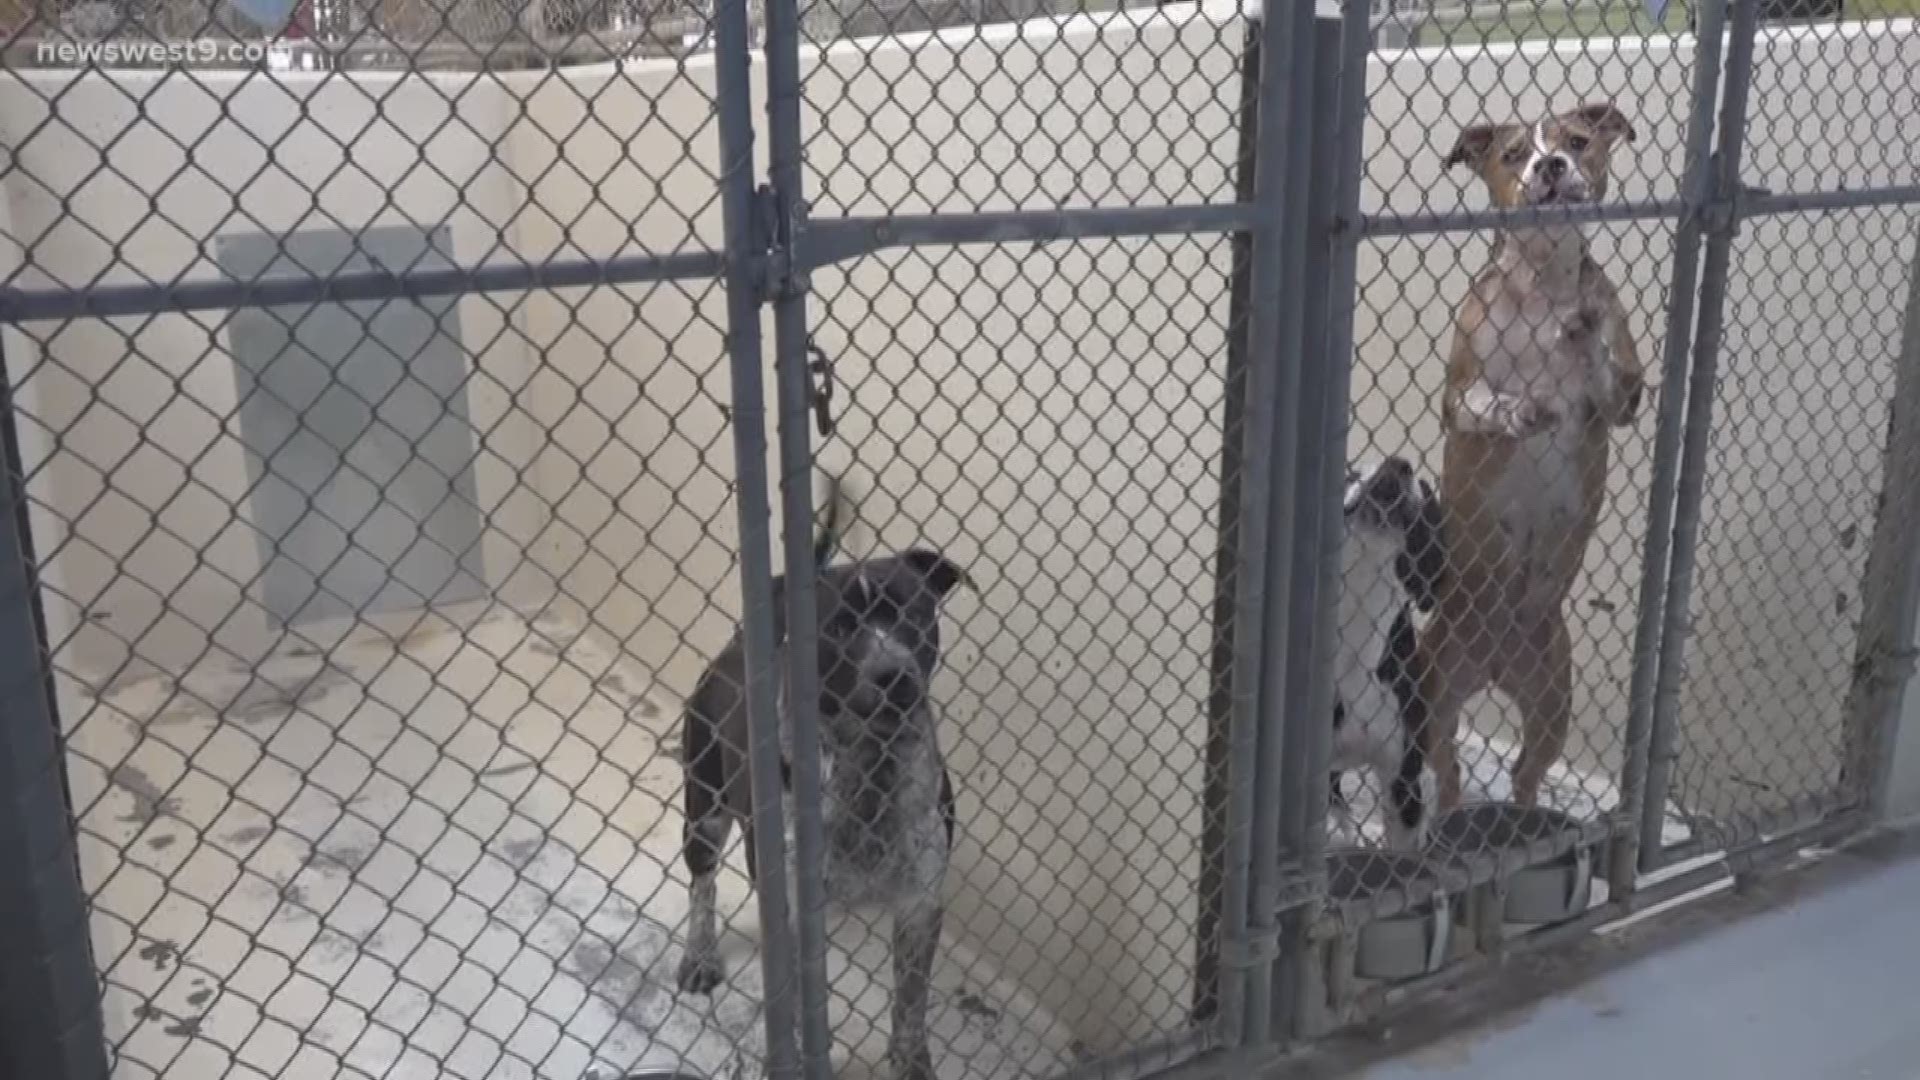 The Odessa animal shelter is trying to keep overcrowding down despite an expected rise in runaways after the Fourth of July holiday.